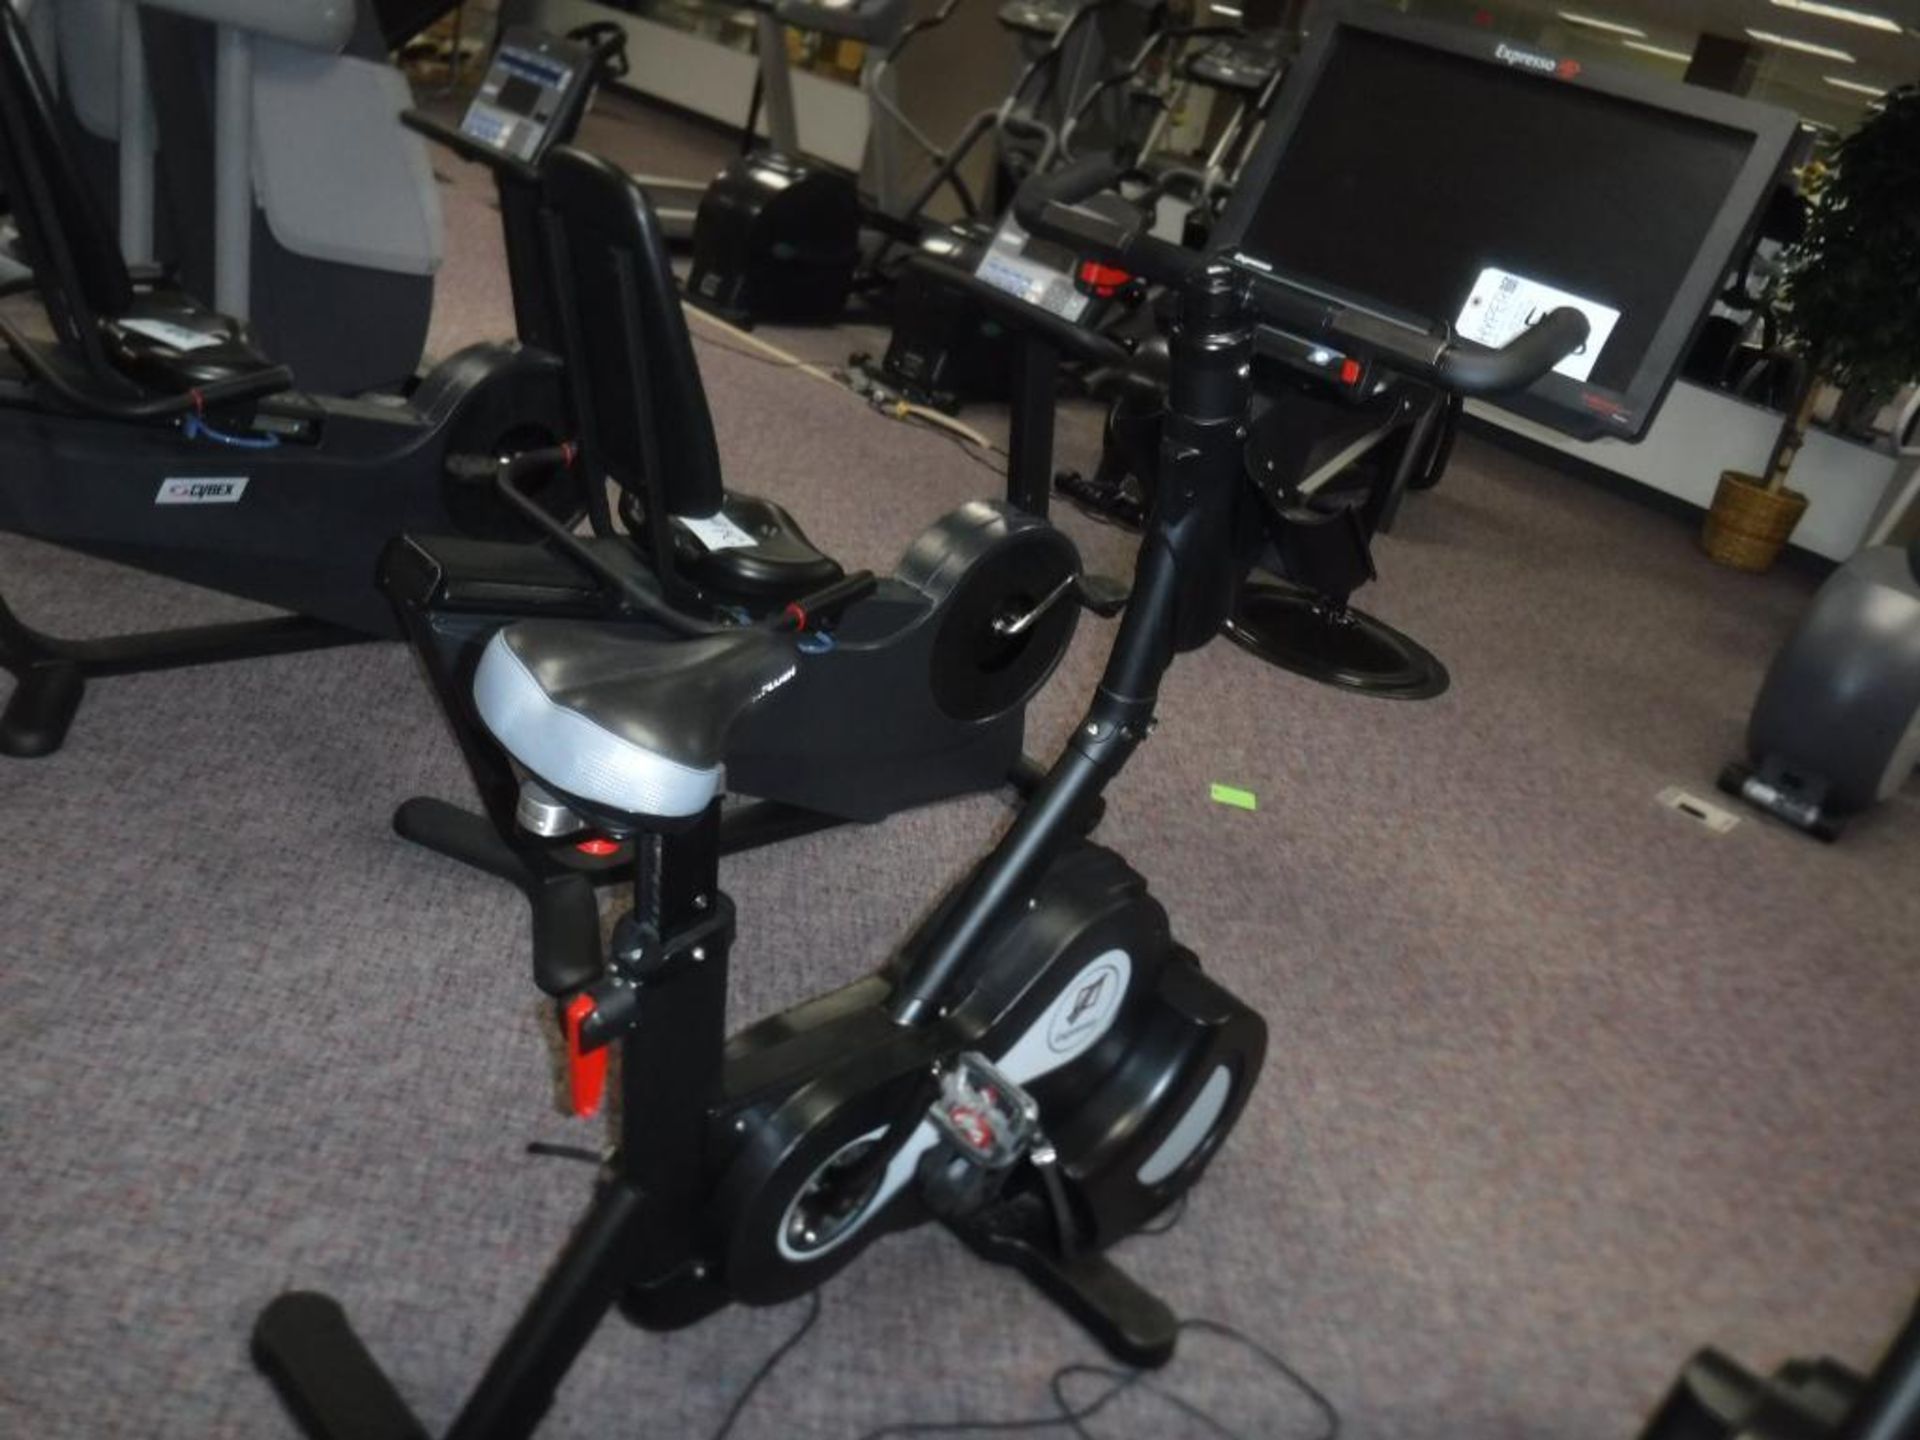 Lot c/o: (1) DiamondBack Preference HRT 1000R Exercise Bicycle Trainer S/N: J980920241-Q9, (1) Cybex - Image 2 of 11